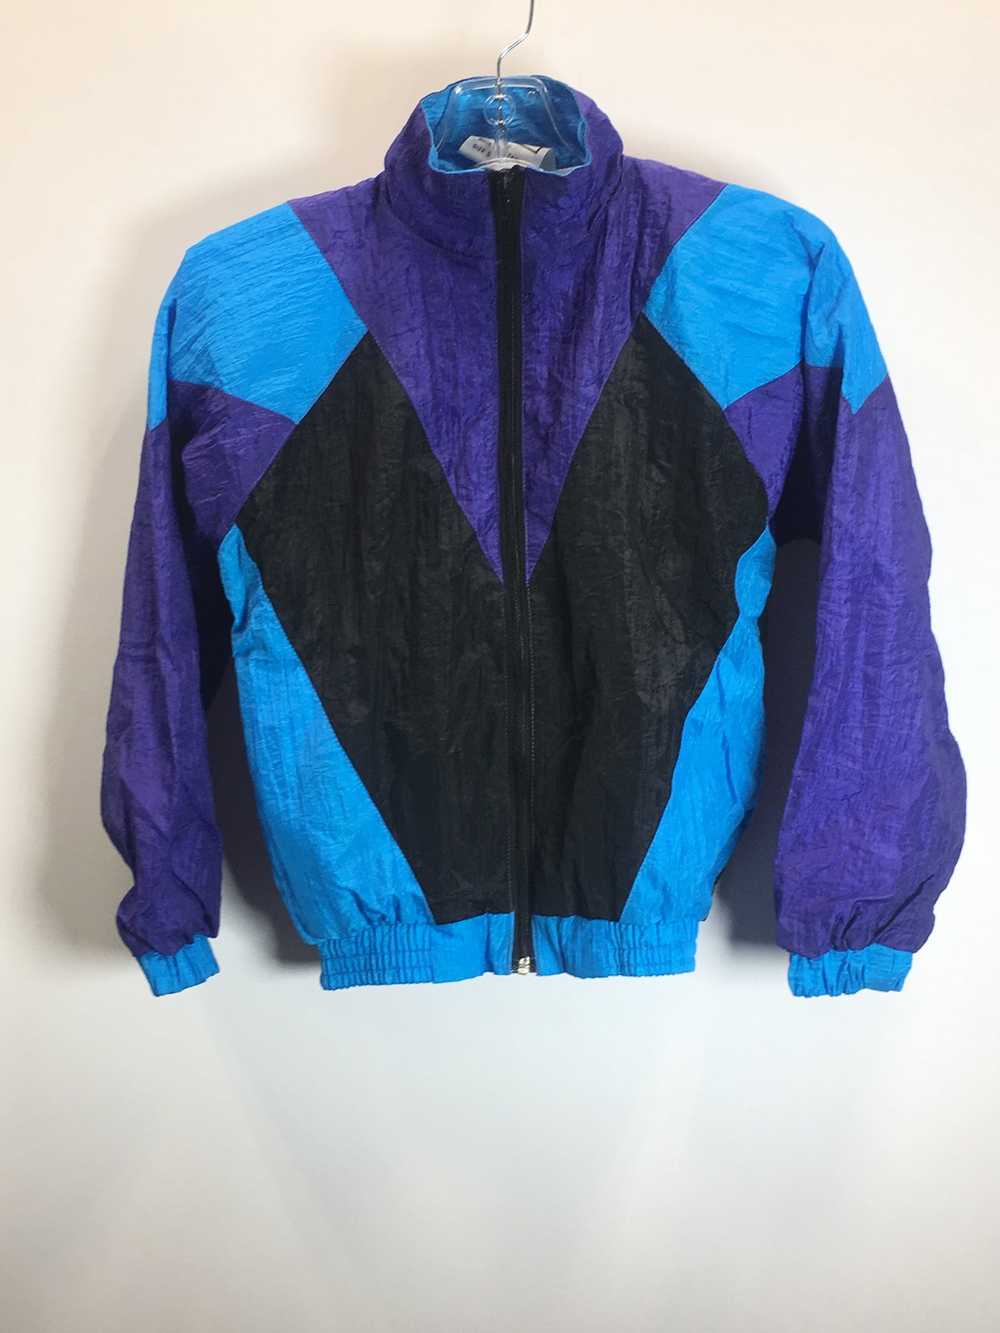 80s Teens Track Suit - image 2